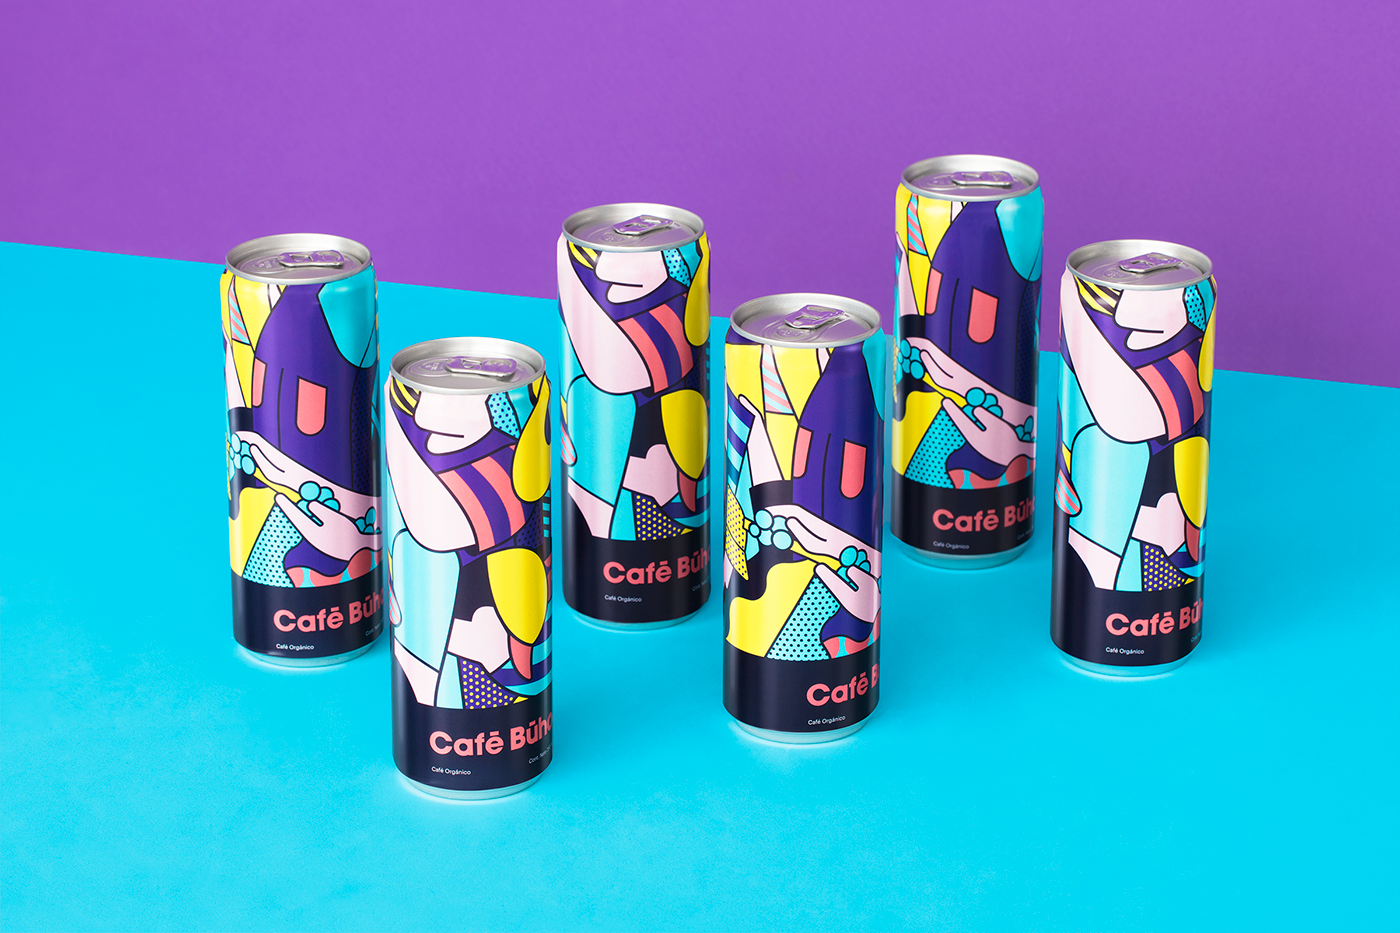 byFutura Futura cafe buho cafe chile branding  colorful ILLUSTRATION  Packaging